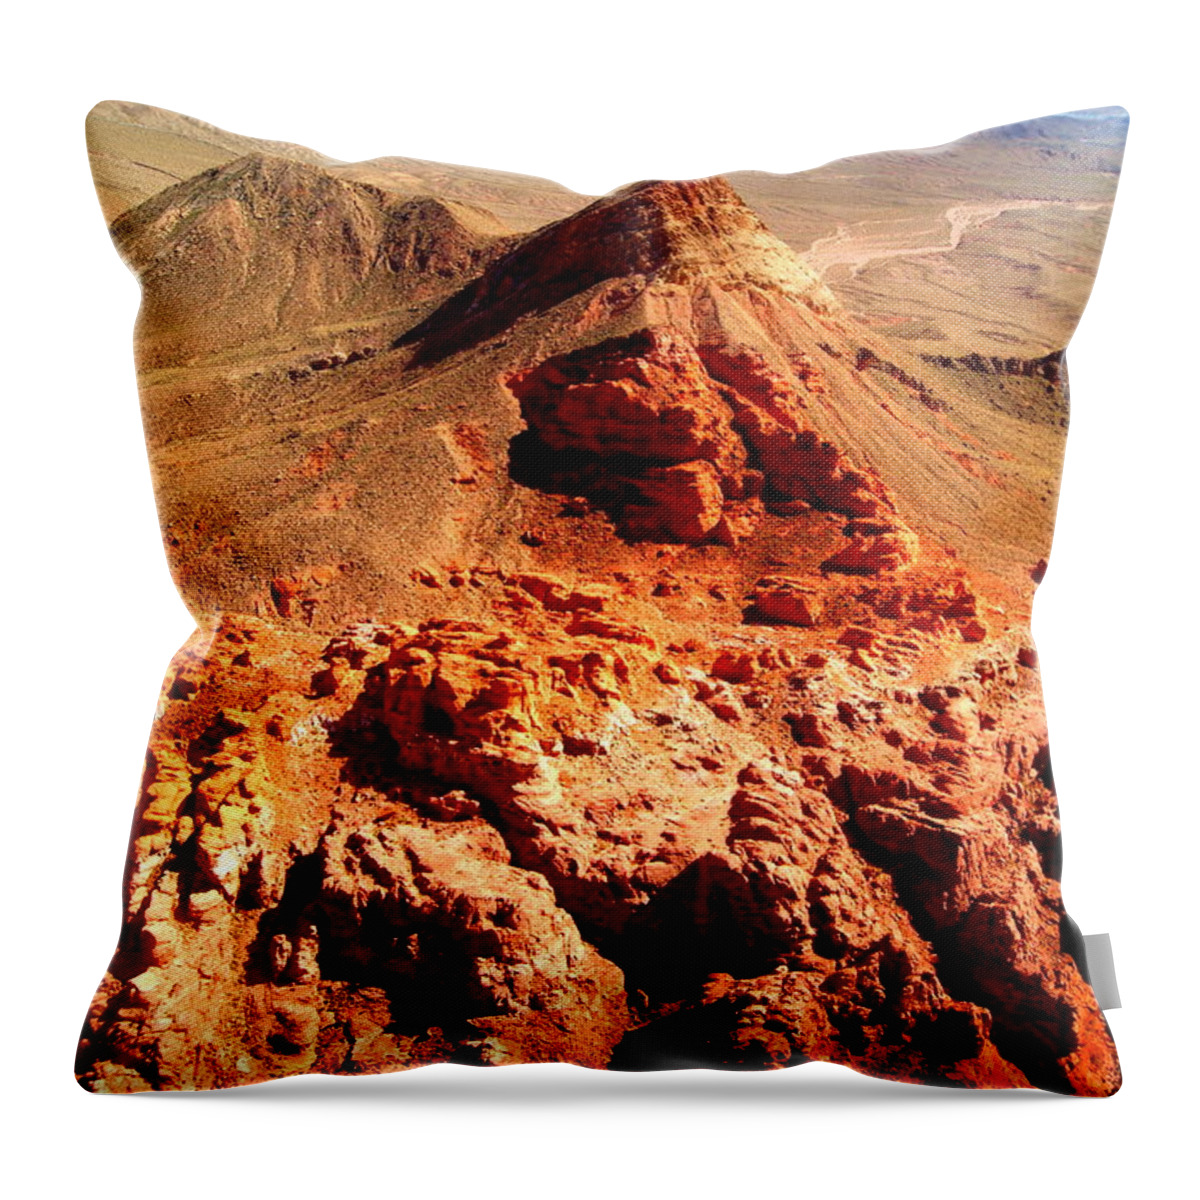 Scenics Throw Pillow featuring the photograph Magic Carpet by Photographers Take Picures With Cameras, I Prefer To Makes P